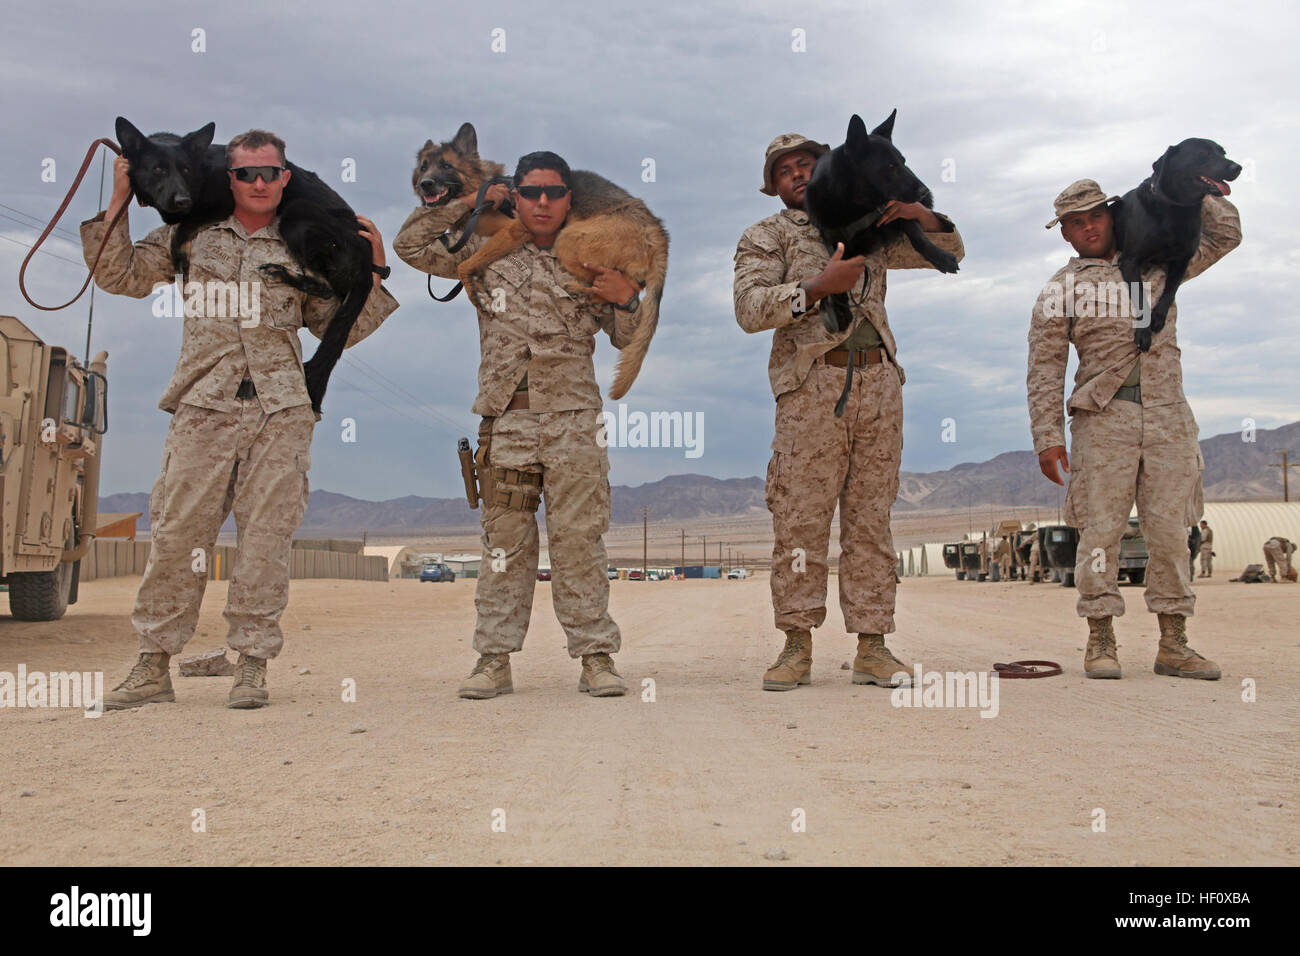 Military working dog handlers with 1st Law Enforcement Battalion, I Marine Expeditionary Force, have been participating in Large Scale Exercise-1, Javelin Thrust 2012. (From left to right: Cpl. John Brady, with his patrol explosive detector dog, Tesa. Cpl. Fidel Rodriguez, with his combat tracker dog, Aron. Cpl. Dwight Jackson, with his patrol explosive detector dog, Hugo. Lance Cpl. Isaiah White, with his specialized search dog, Moxie). 1st Law Enforcement Battalion 120712-M-PF875-027 Stock Photo